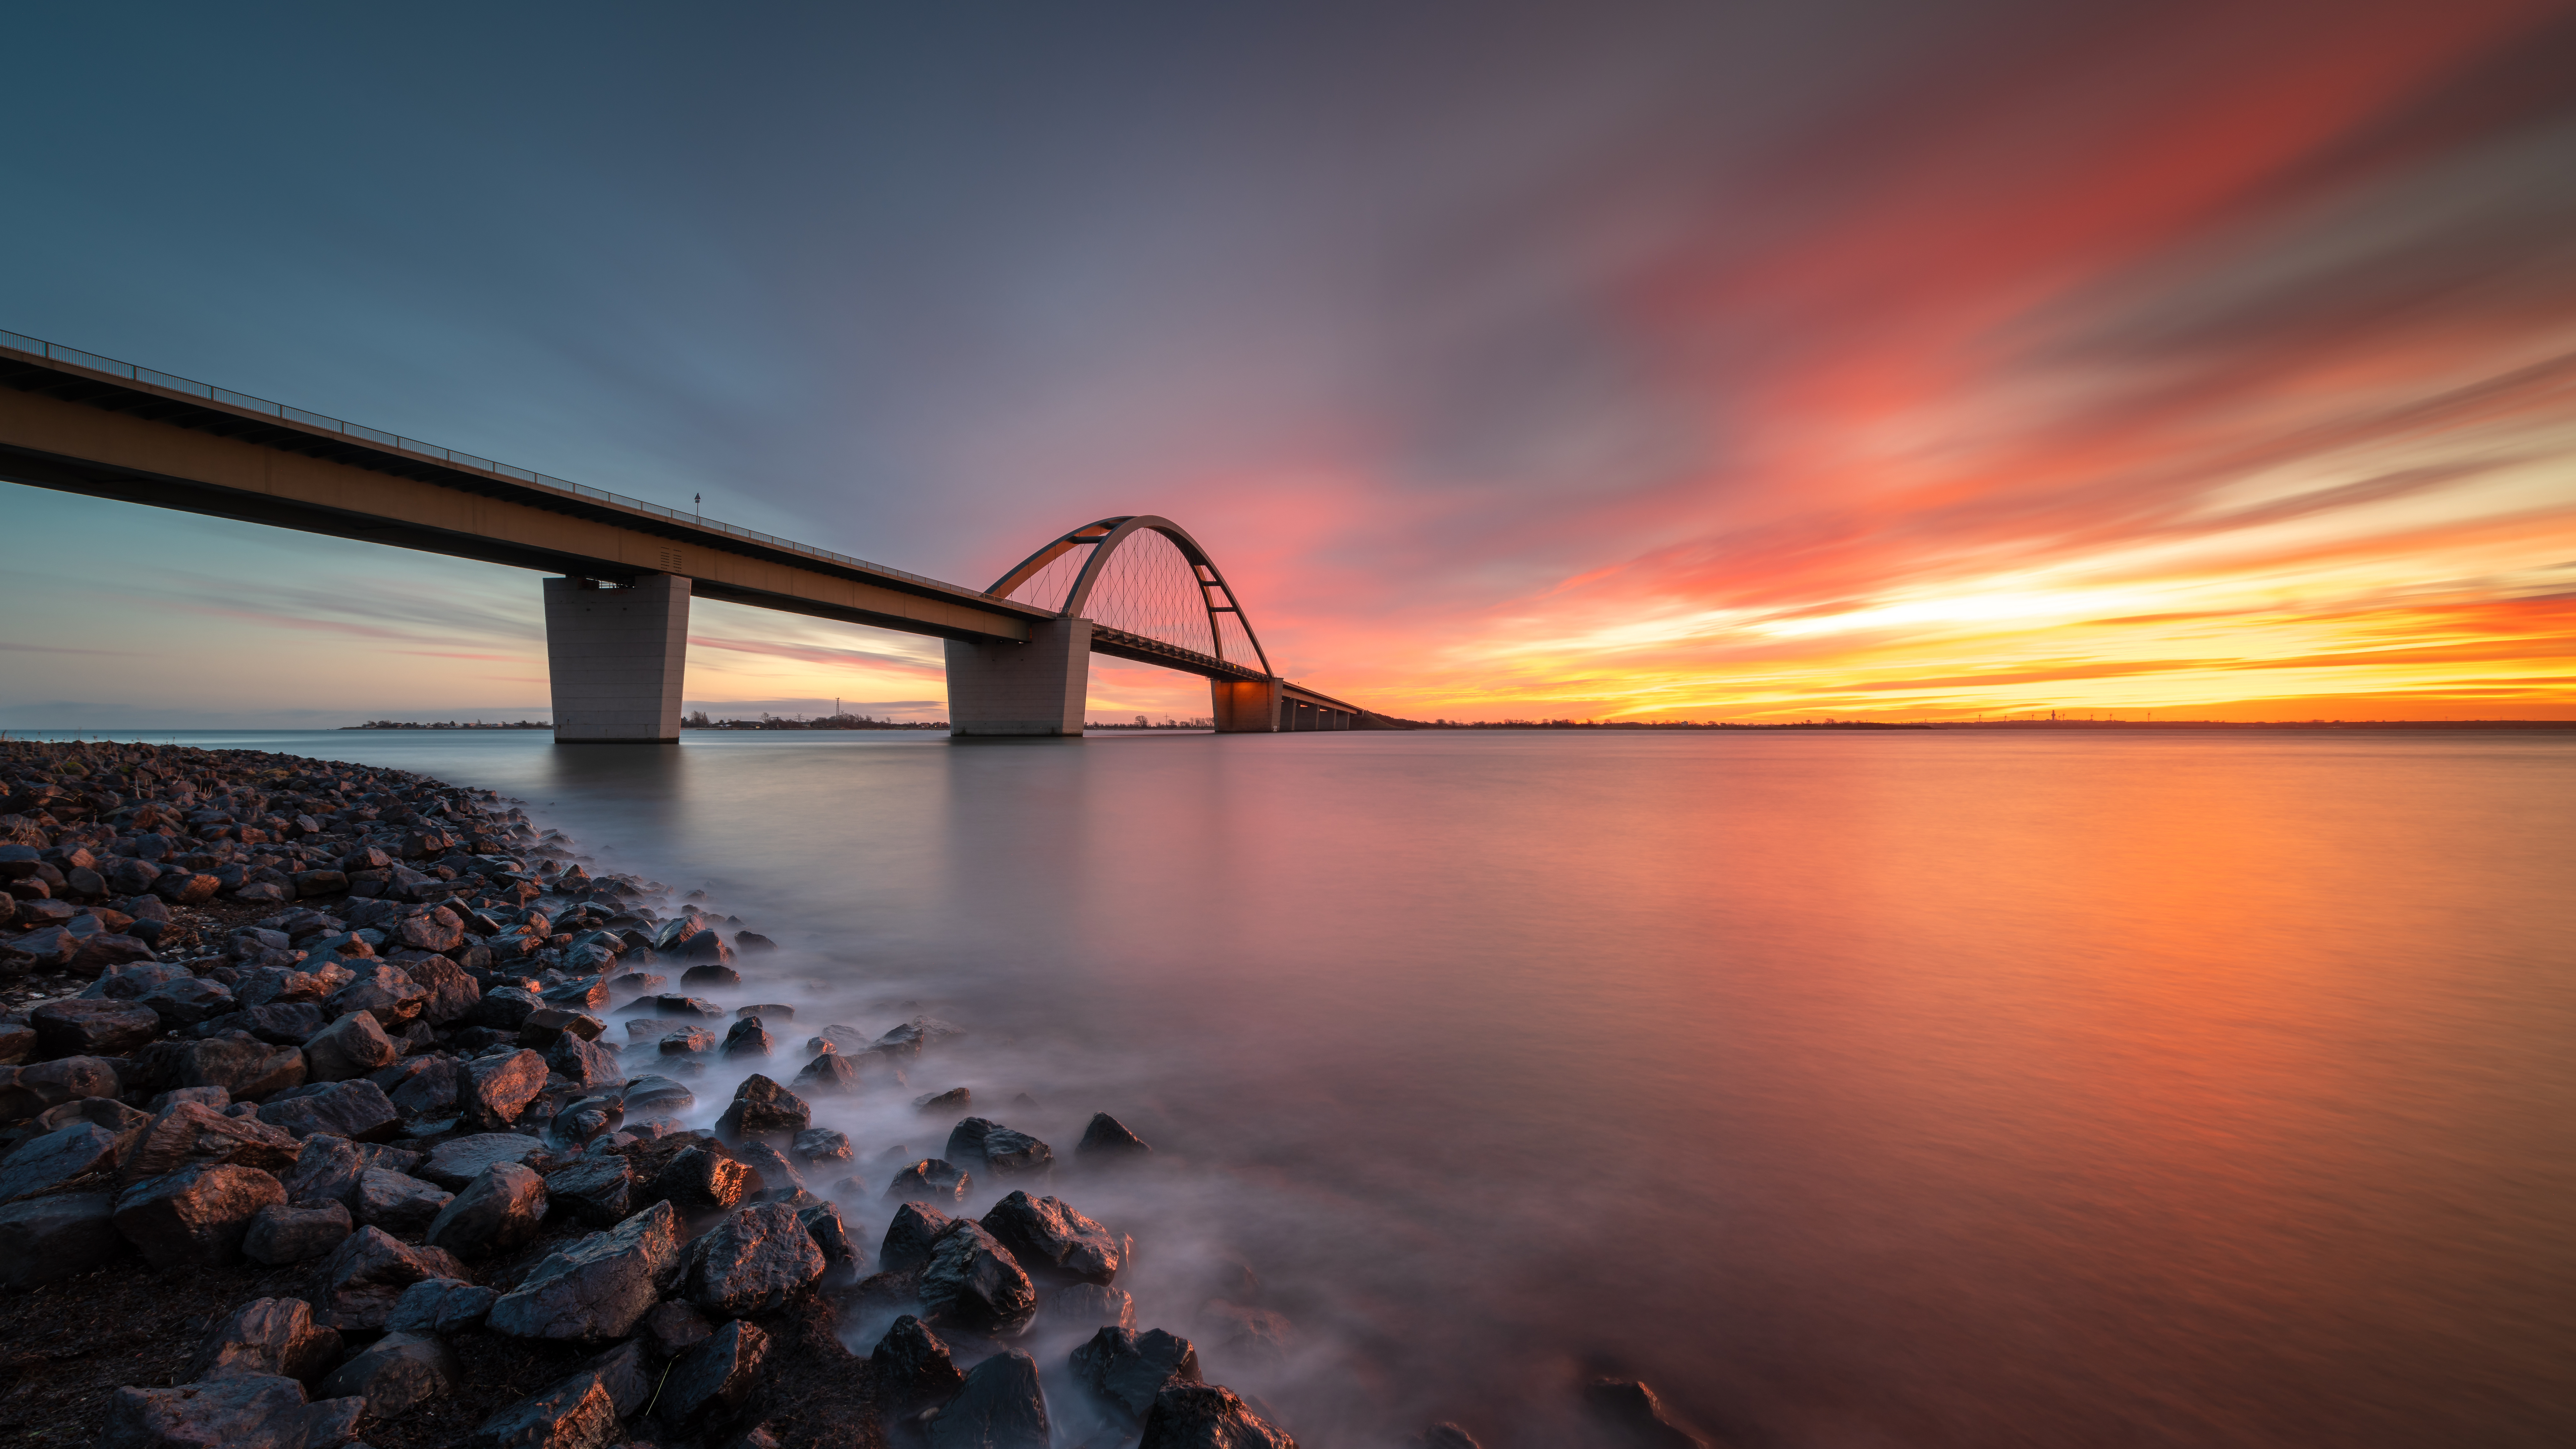 7680x4320 Bridge Sunset 8k 8k HD 4k Wallpapers, Images, Backgrounds, Photos  and Pictures